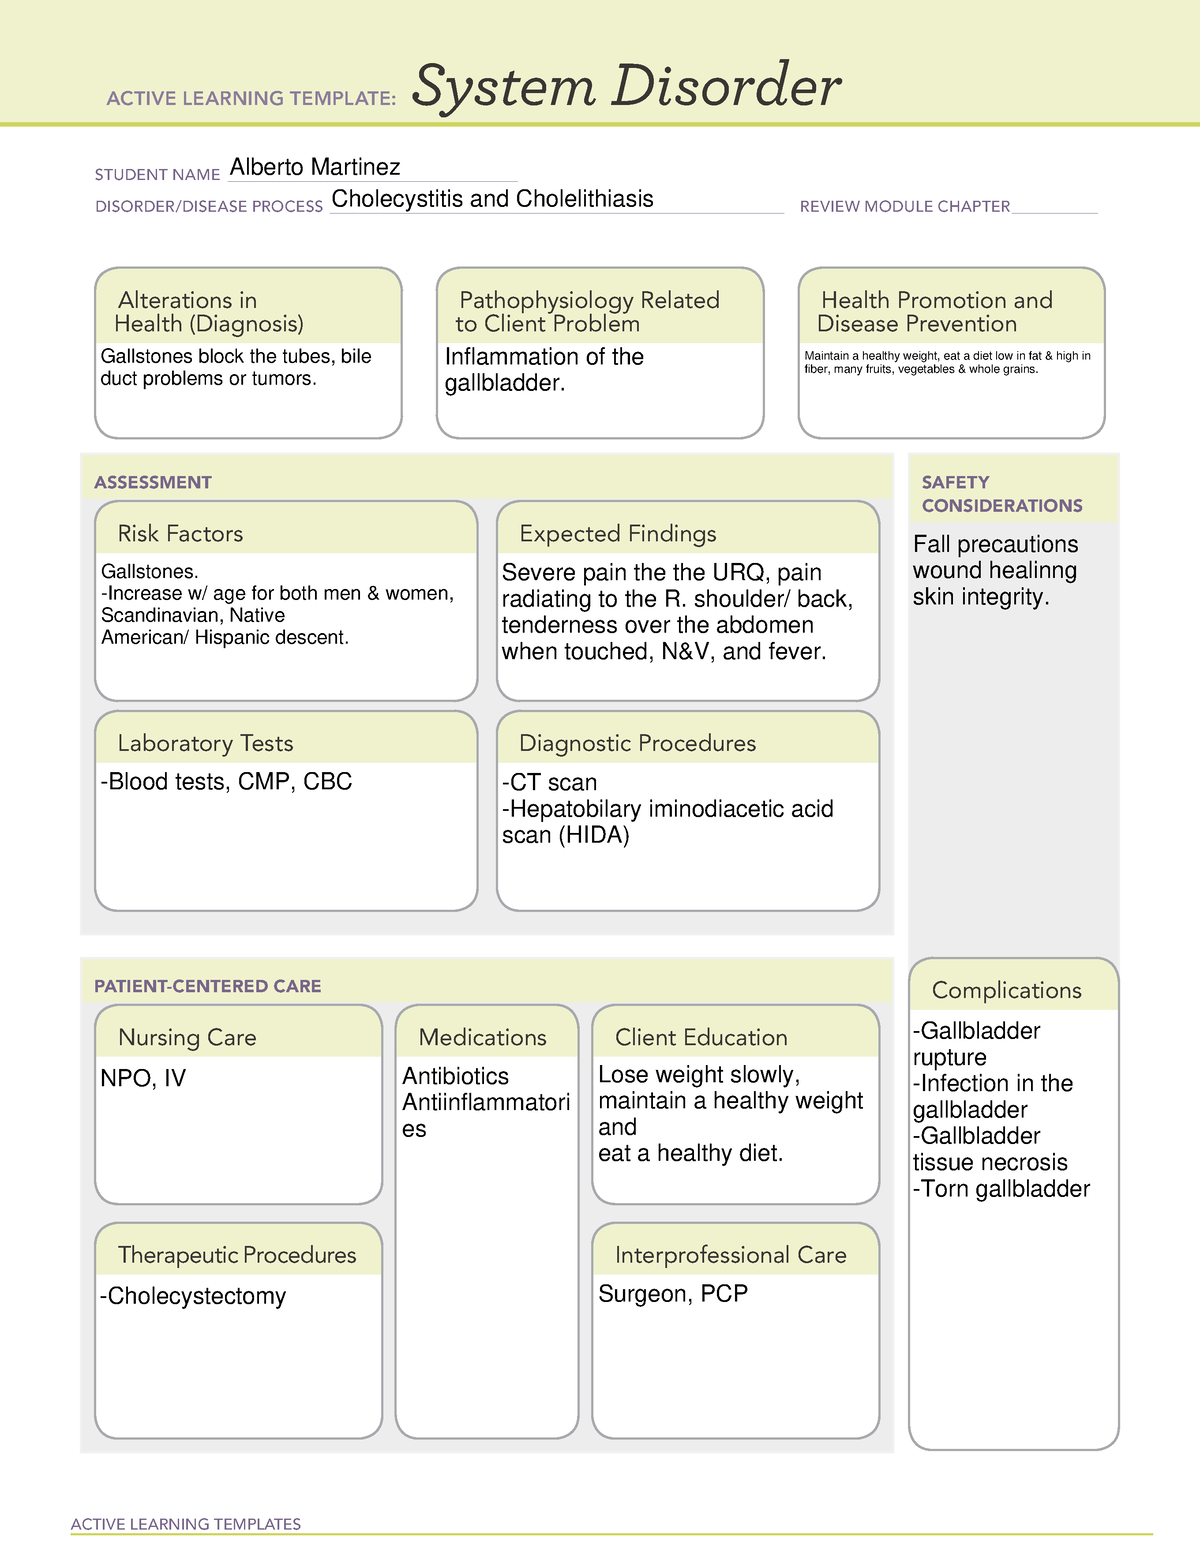 System Disorder template Cholecystitis - ACTIVE LEARNING TEMPLATES ...